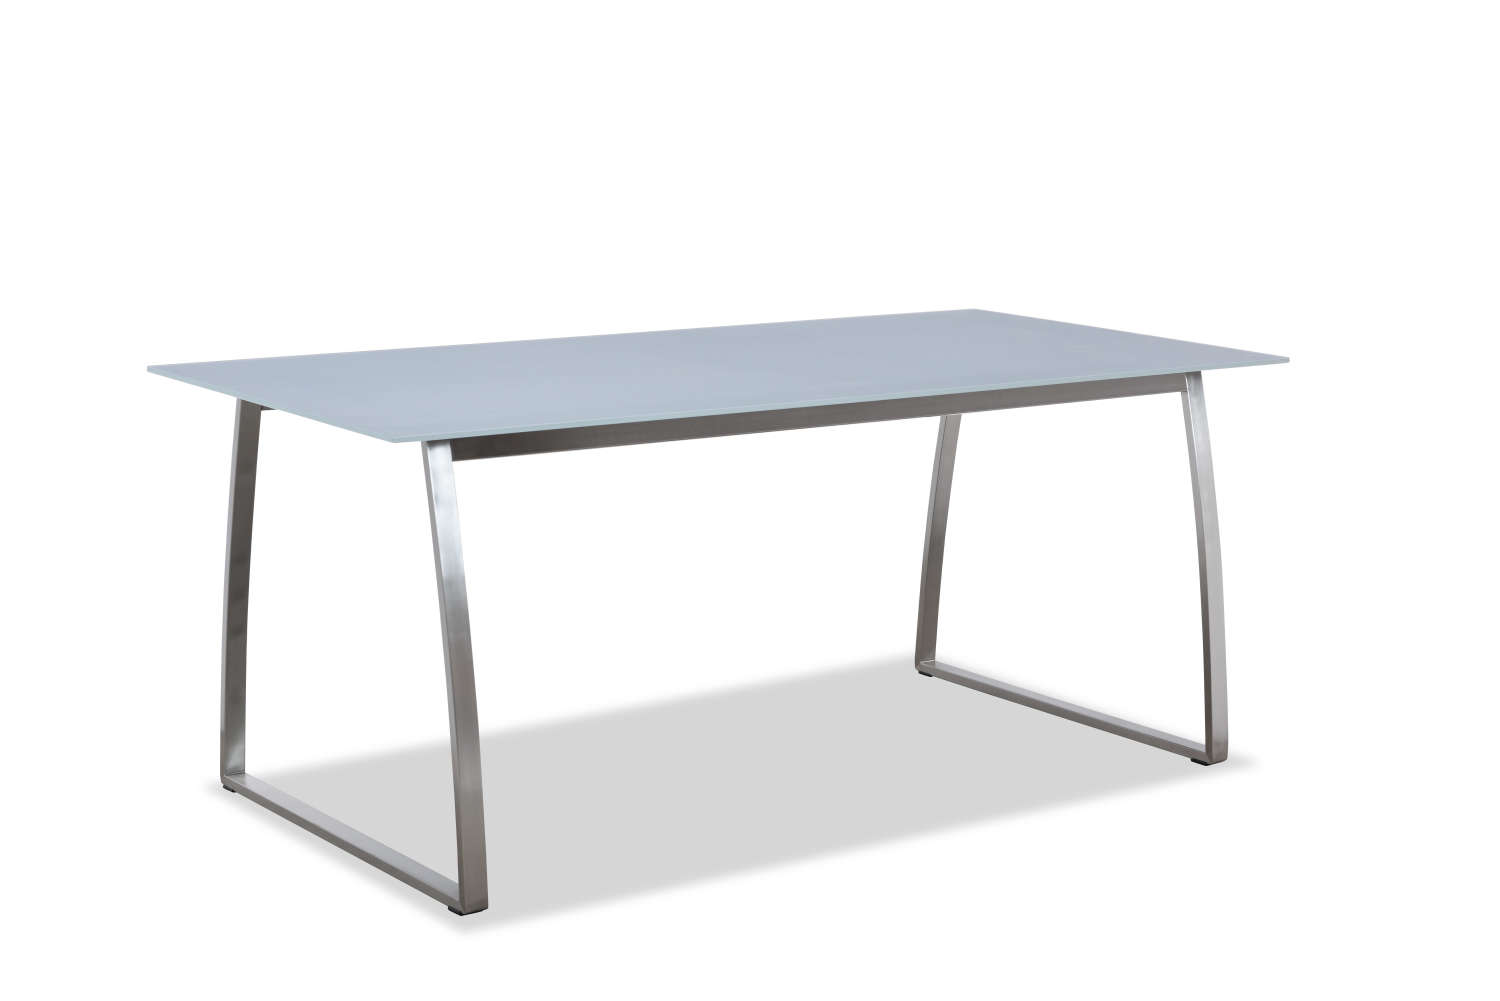 Outdoor glass dining table (T303G)